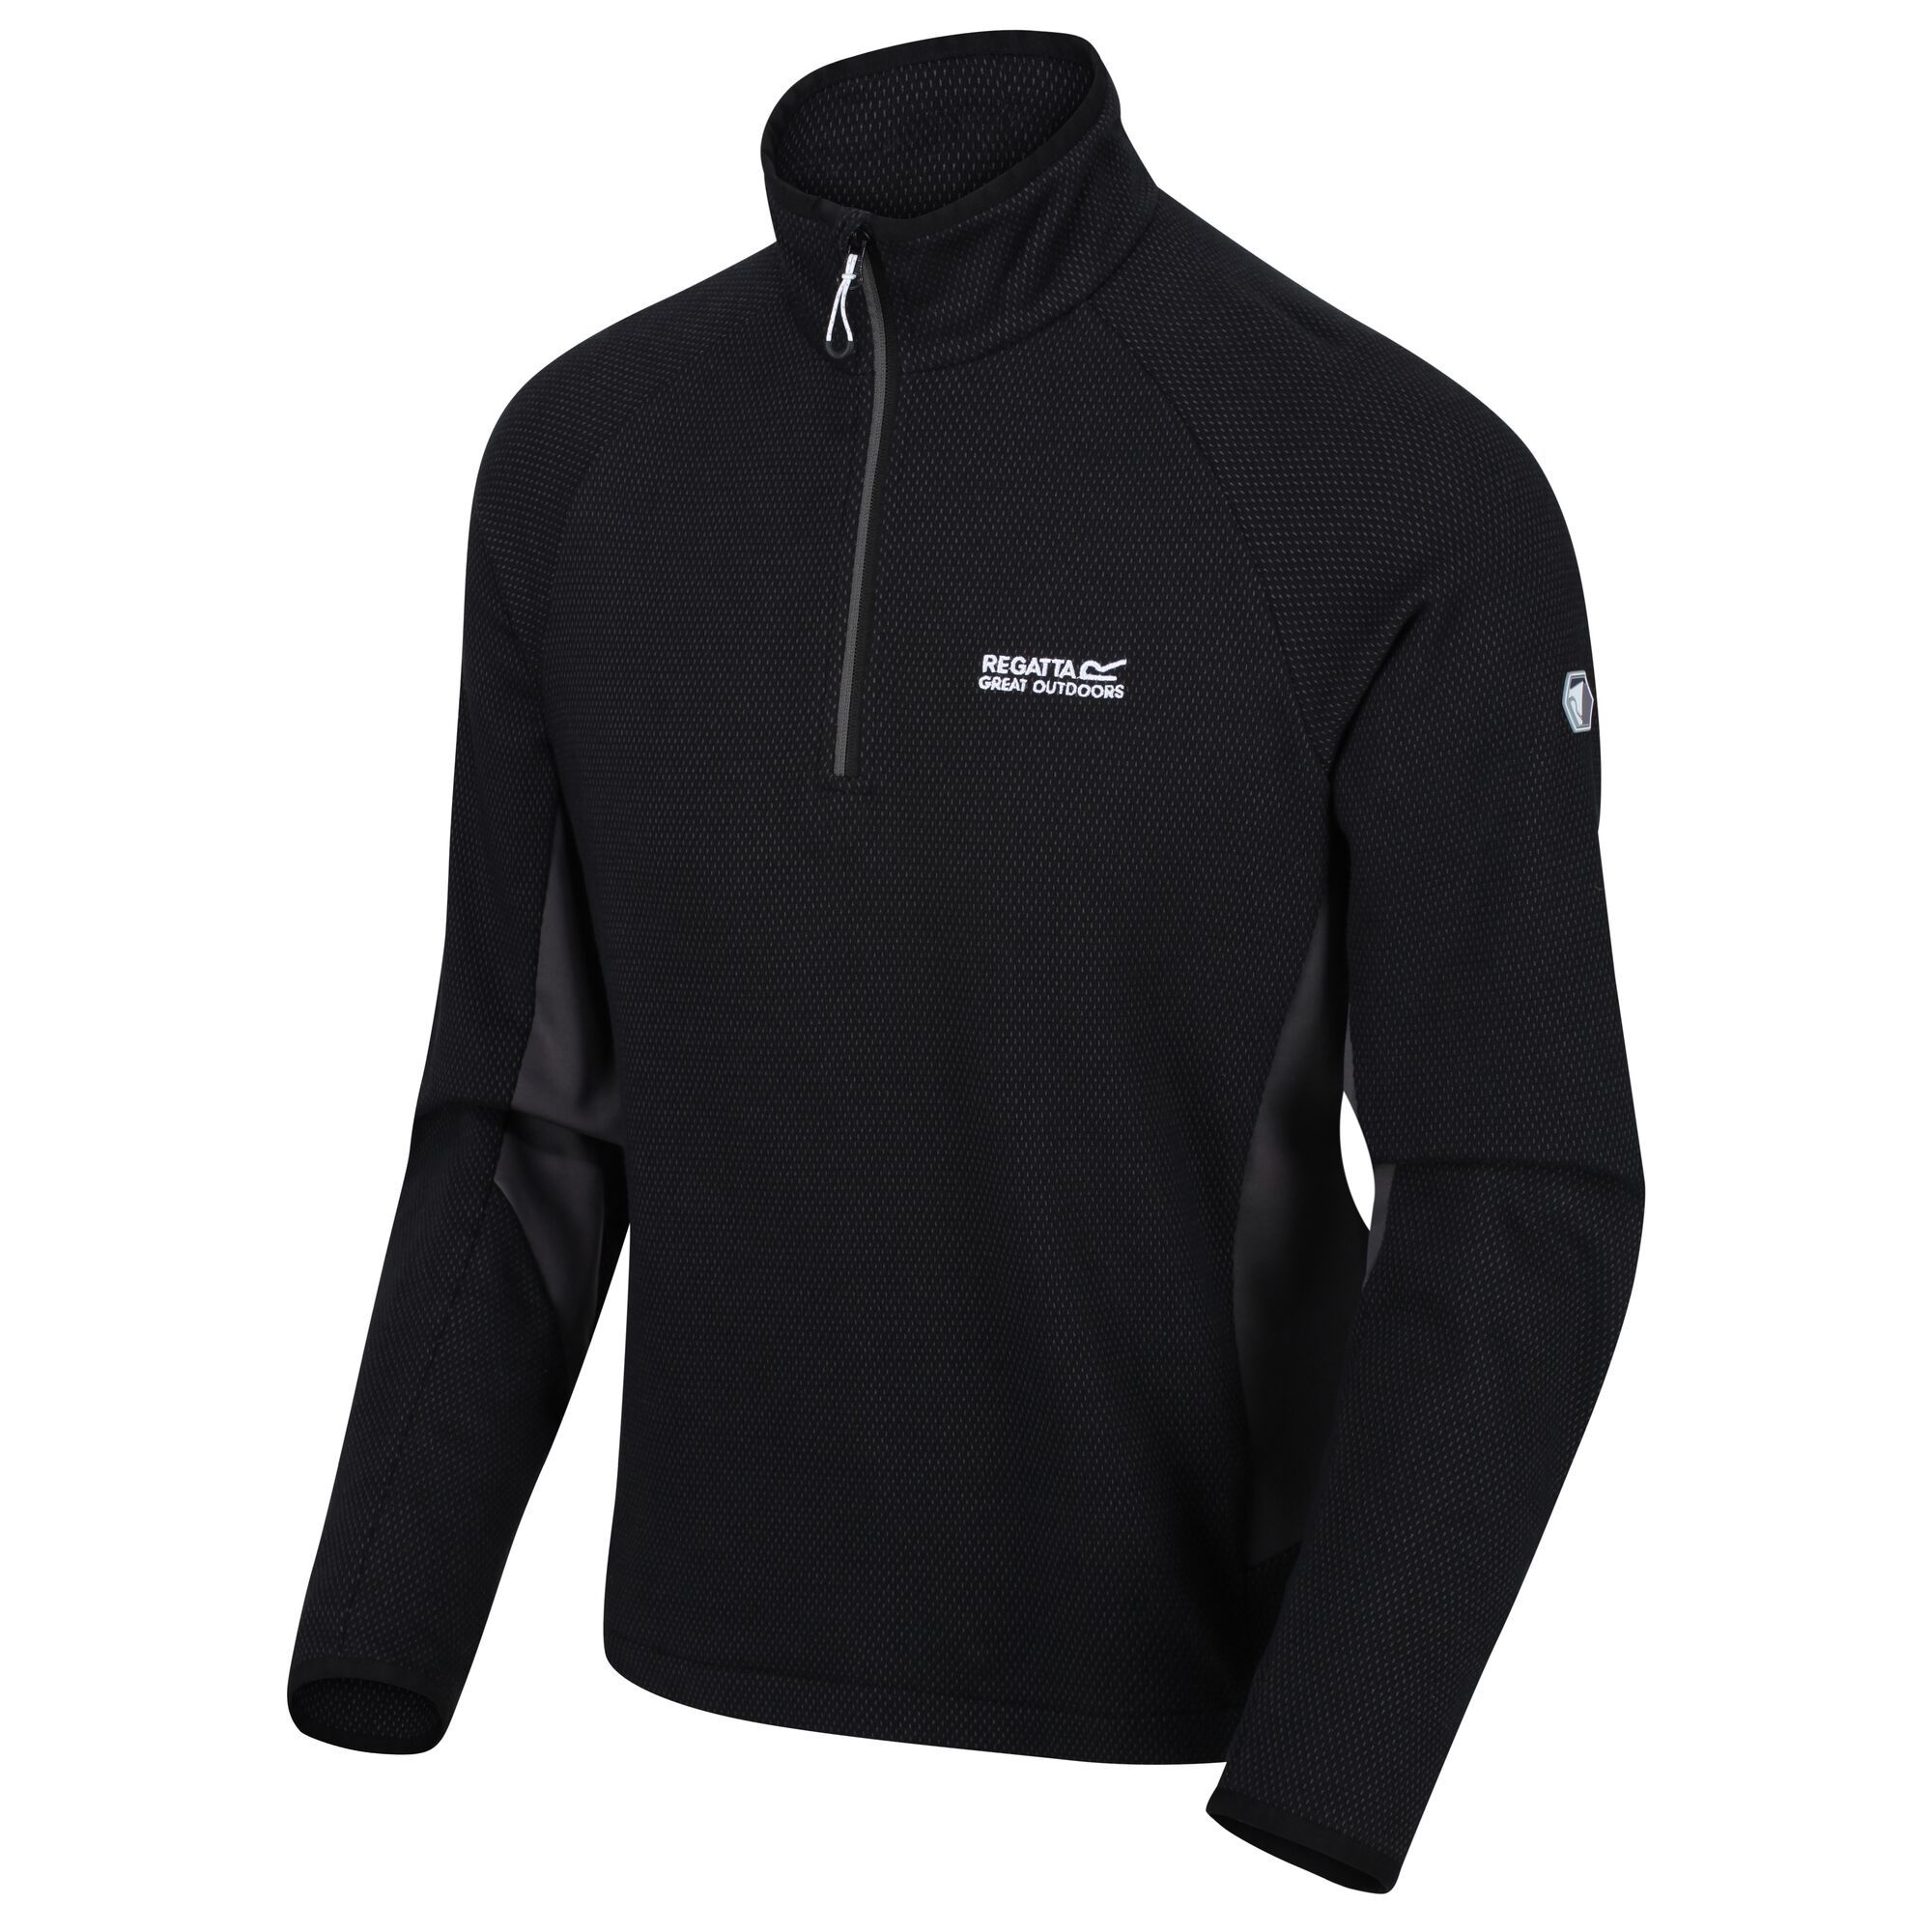 Material: 74% cotton & 26% polyester two tone fleece. Extol stretch side panels. Zip neck. Stretch binding to neck and cuffs.